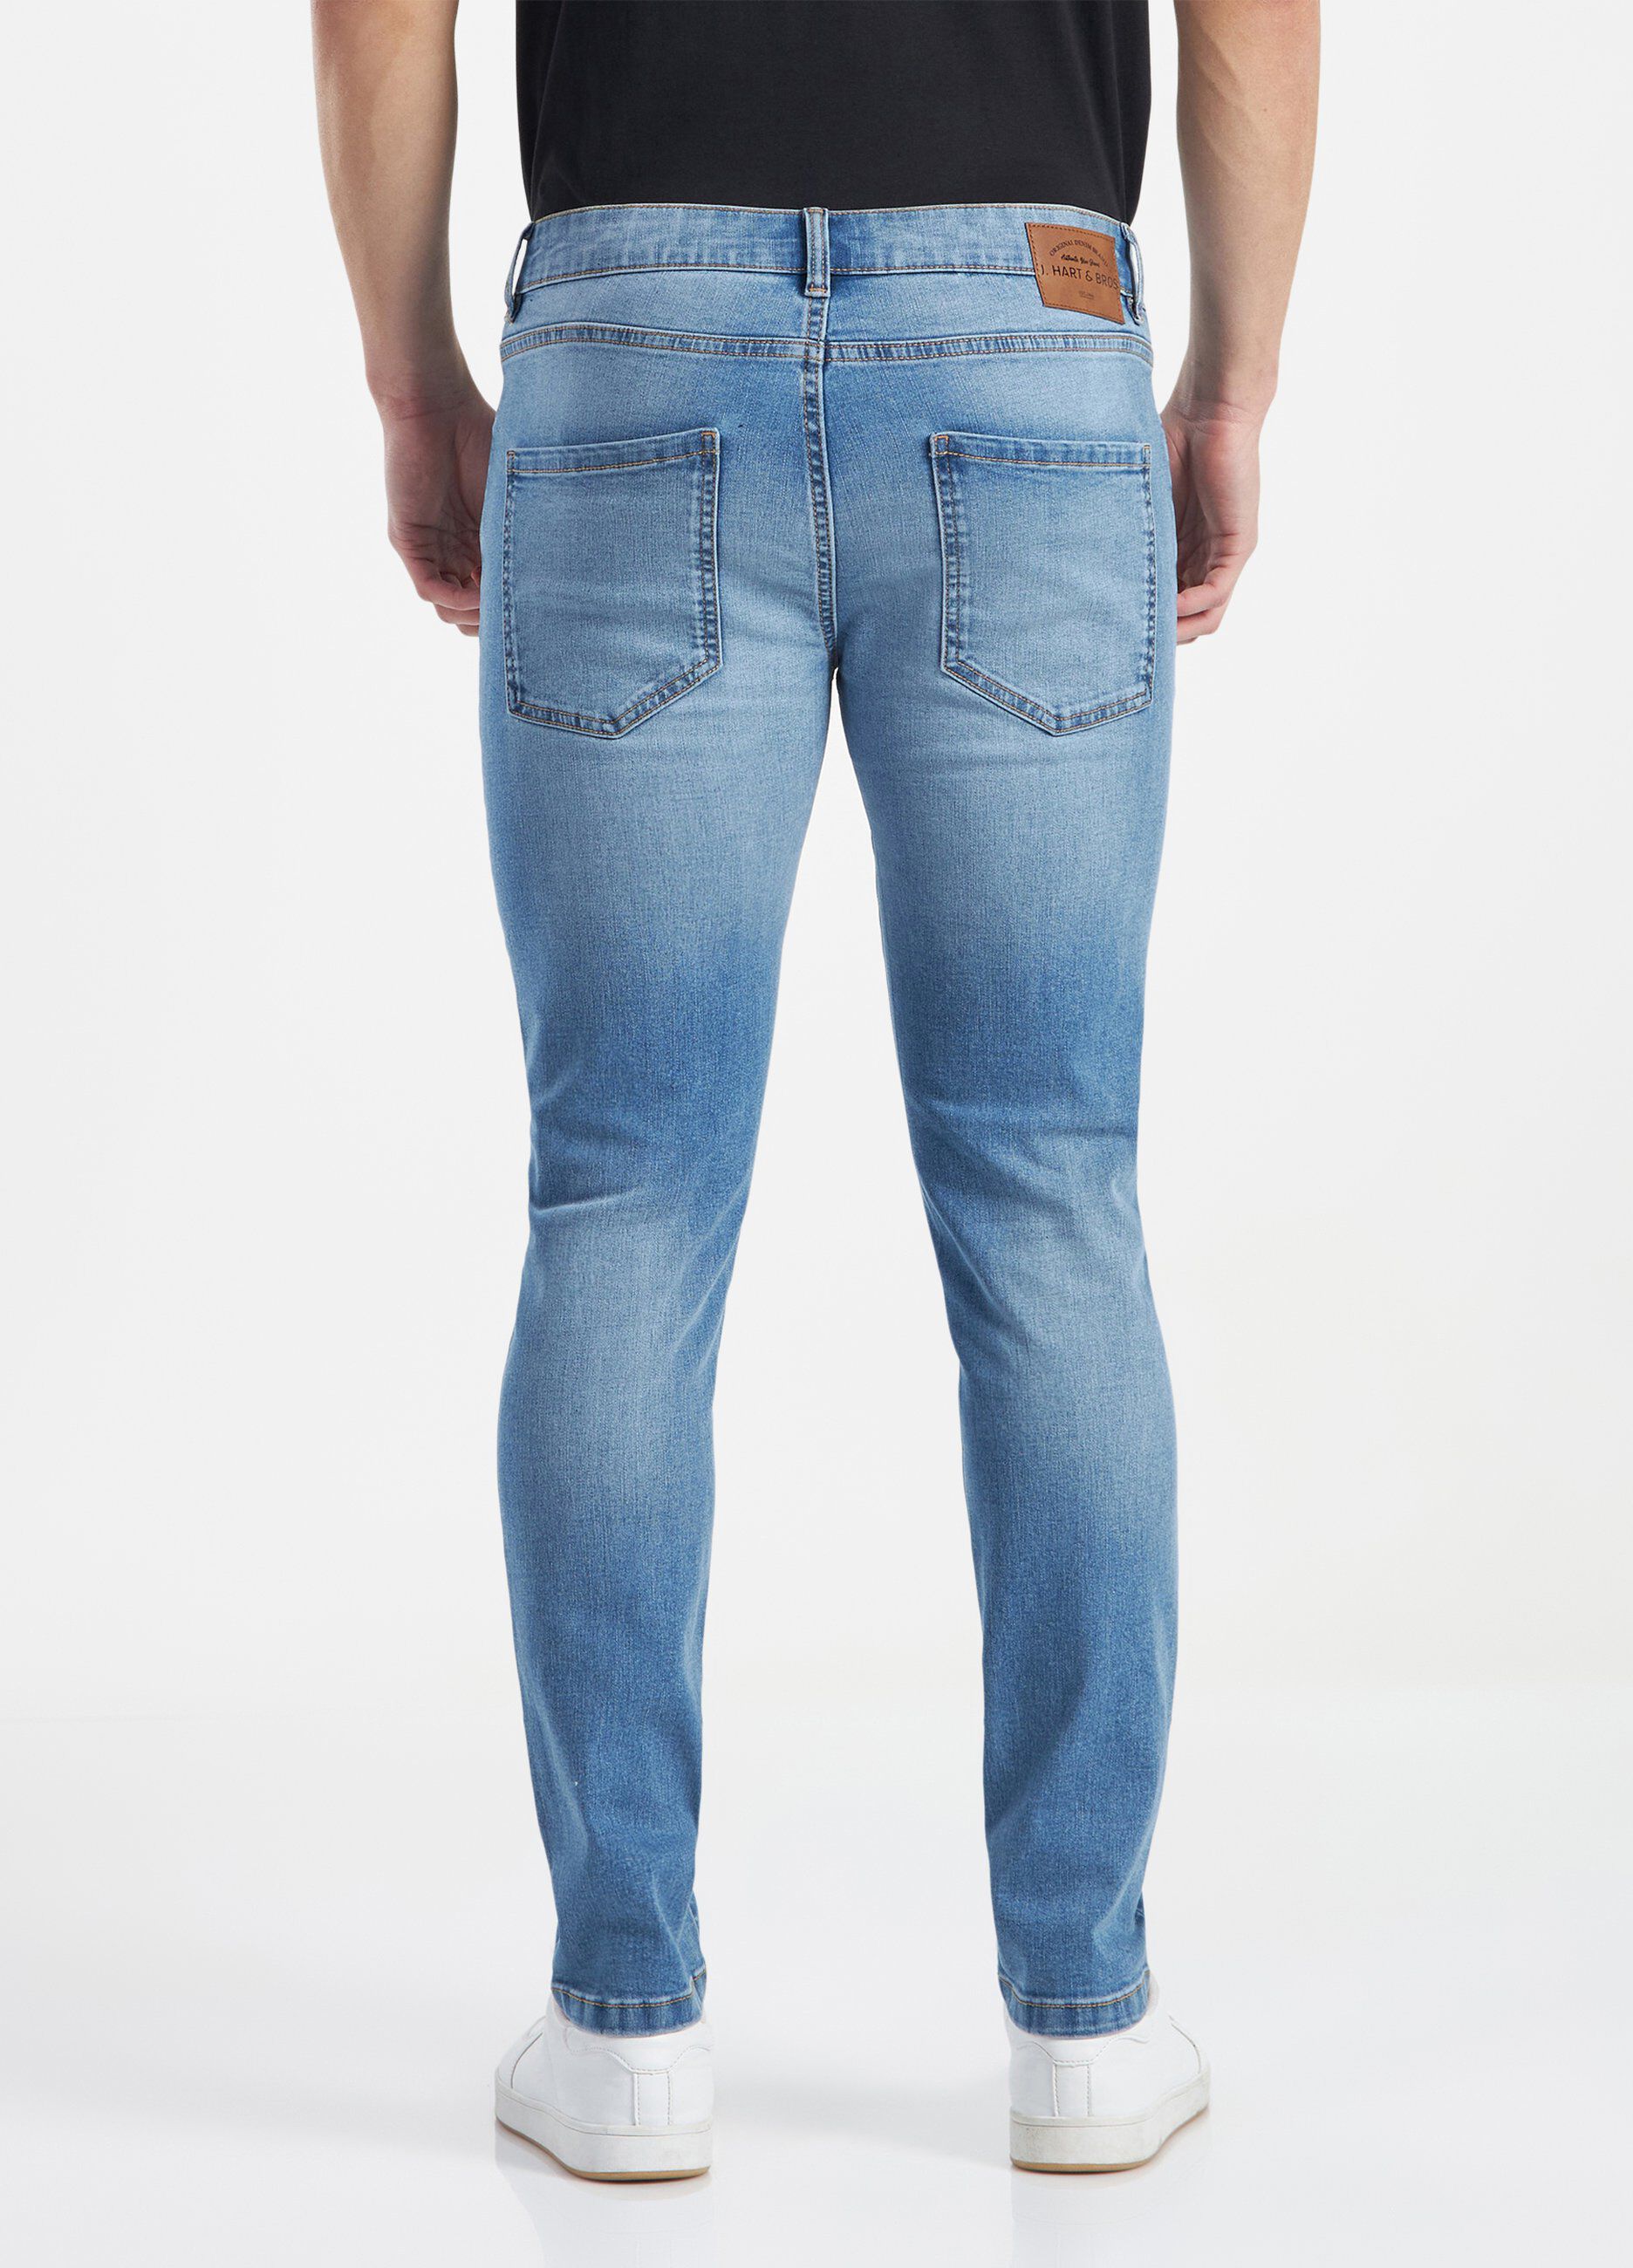 Jeans skinny fit stone washed uomo_1